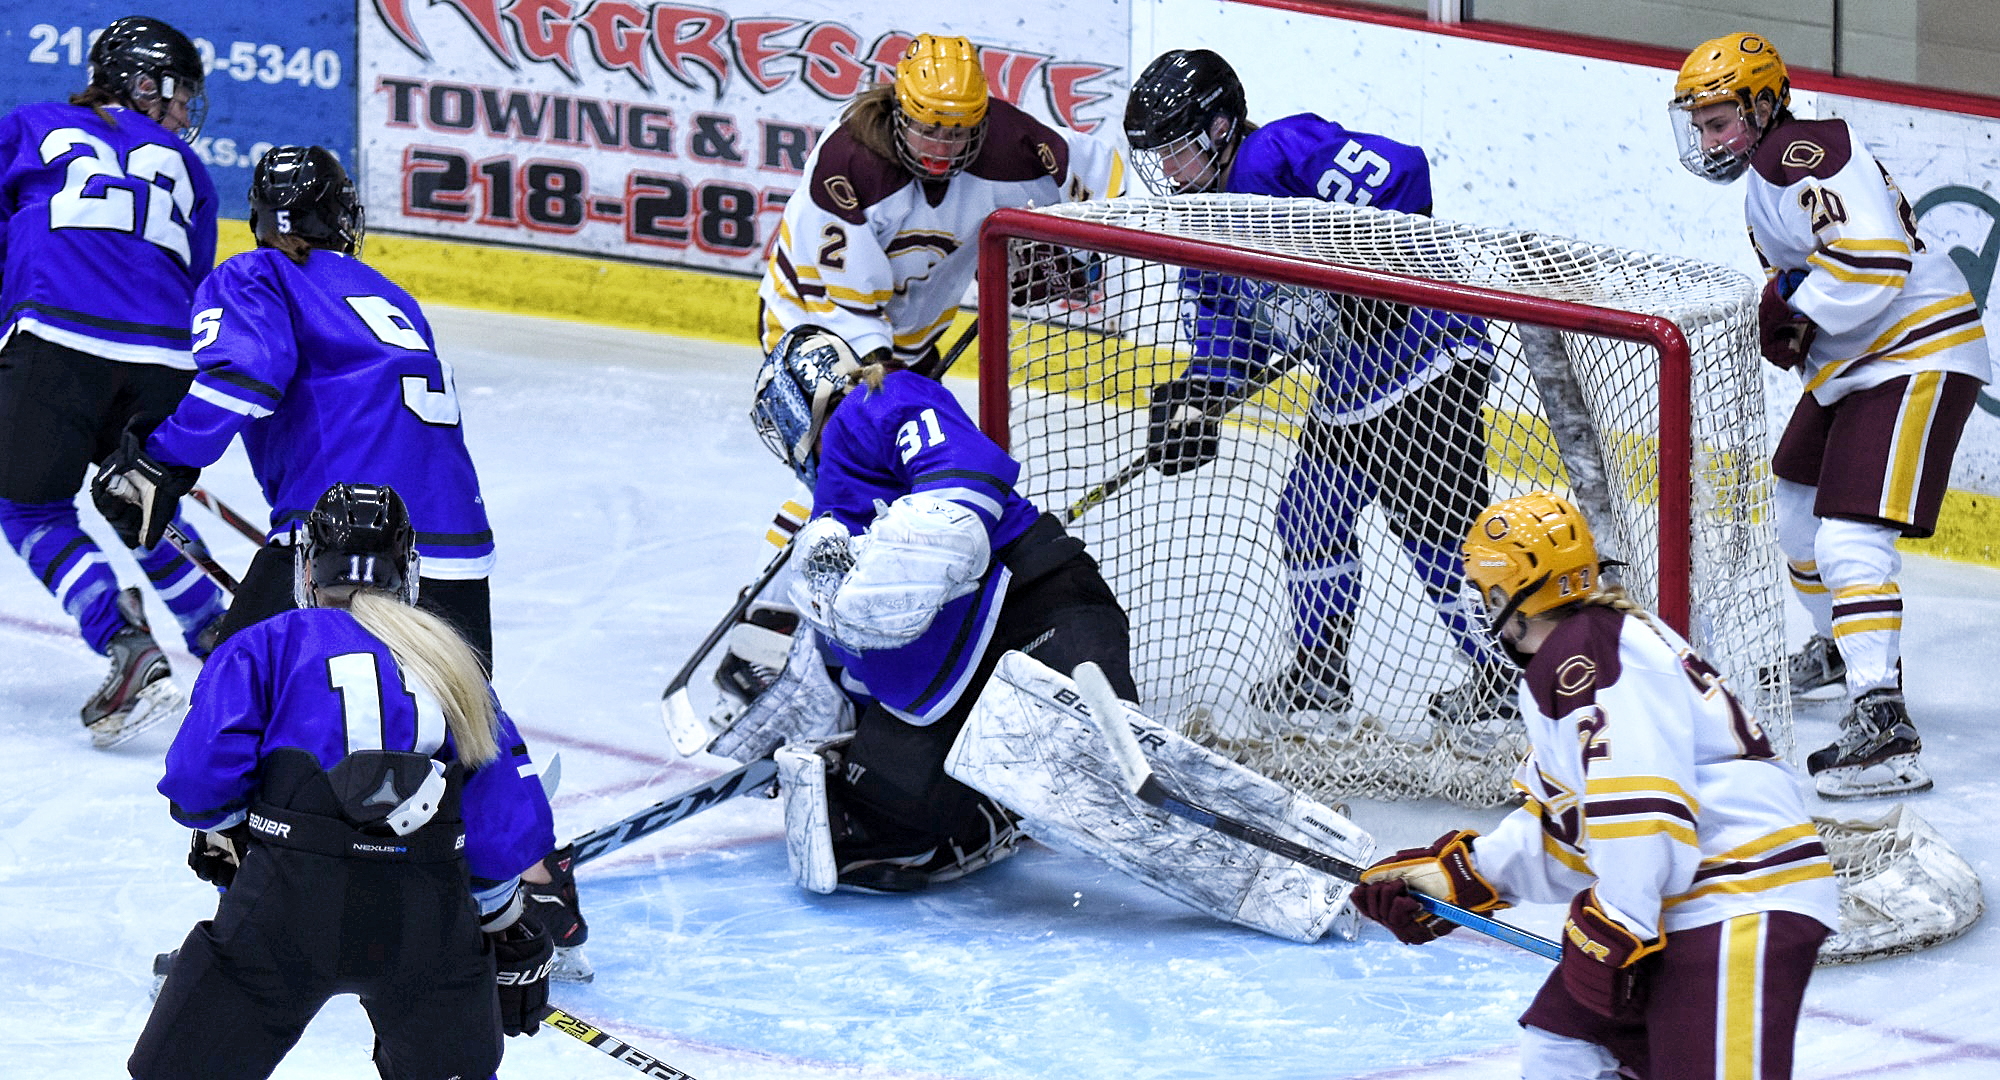 Amanda Flemming (#2) follows the puck slide into the net for the Cobbers' in their 3-1 win over Finlandia.